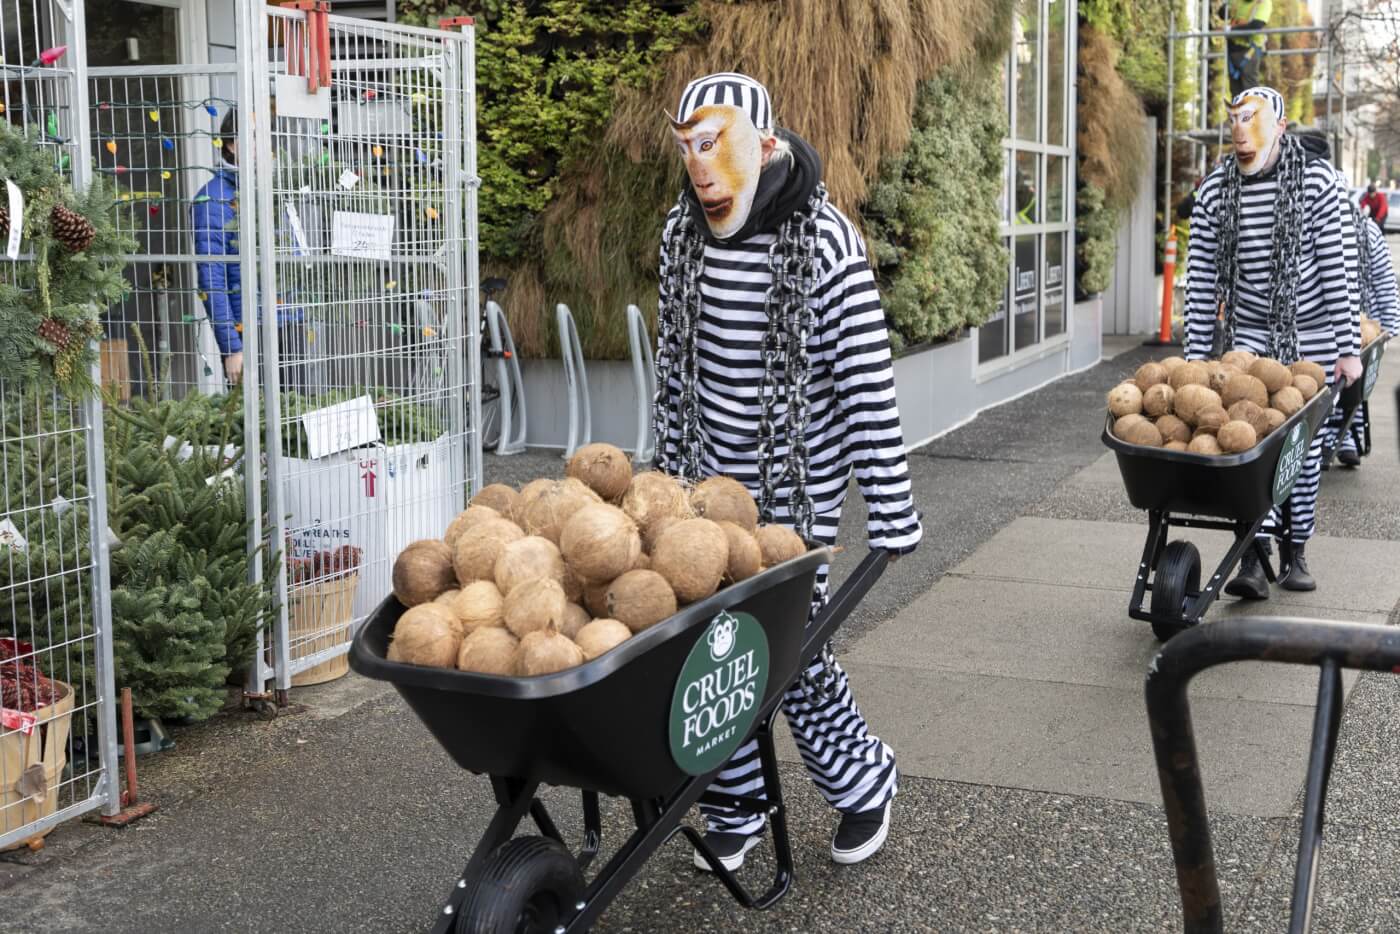 PETA supporters dressed in black and white striped clothing with chains around them and monkey masks on, pushing wheelbarrows full of coconuts toward a Whole Foods store in Vancouver, as a peaceful demonstration protesting coconut milk from Thailand